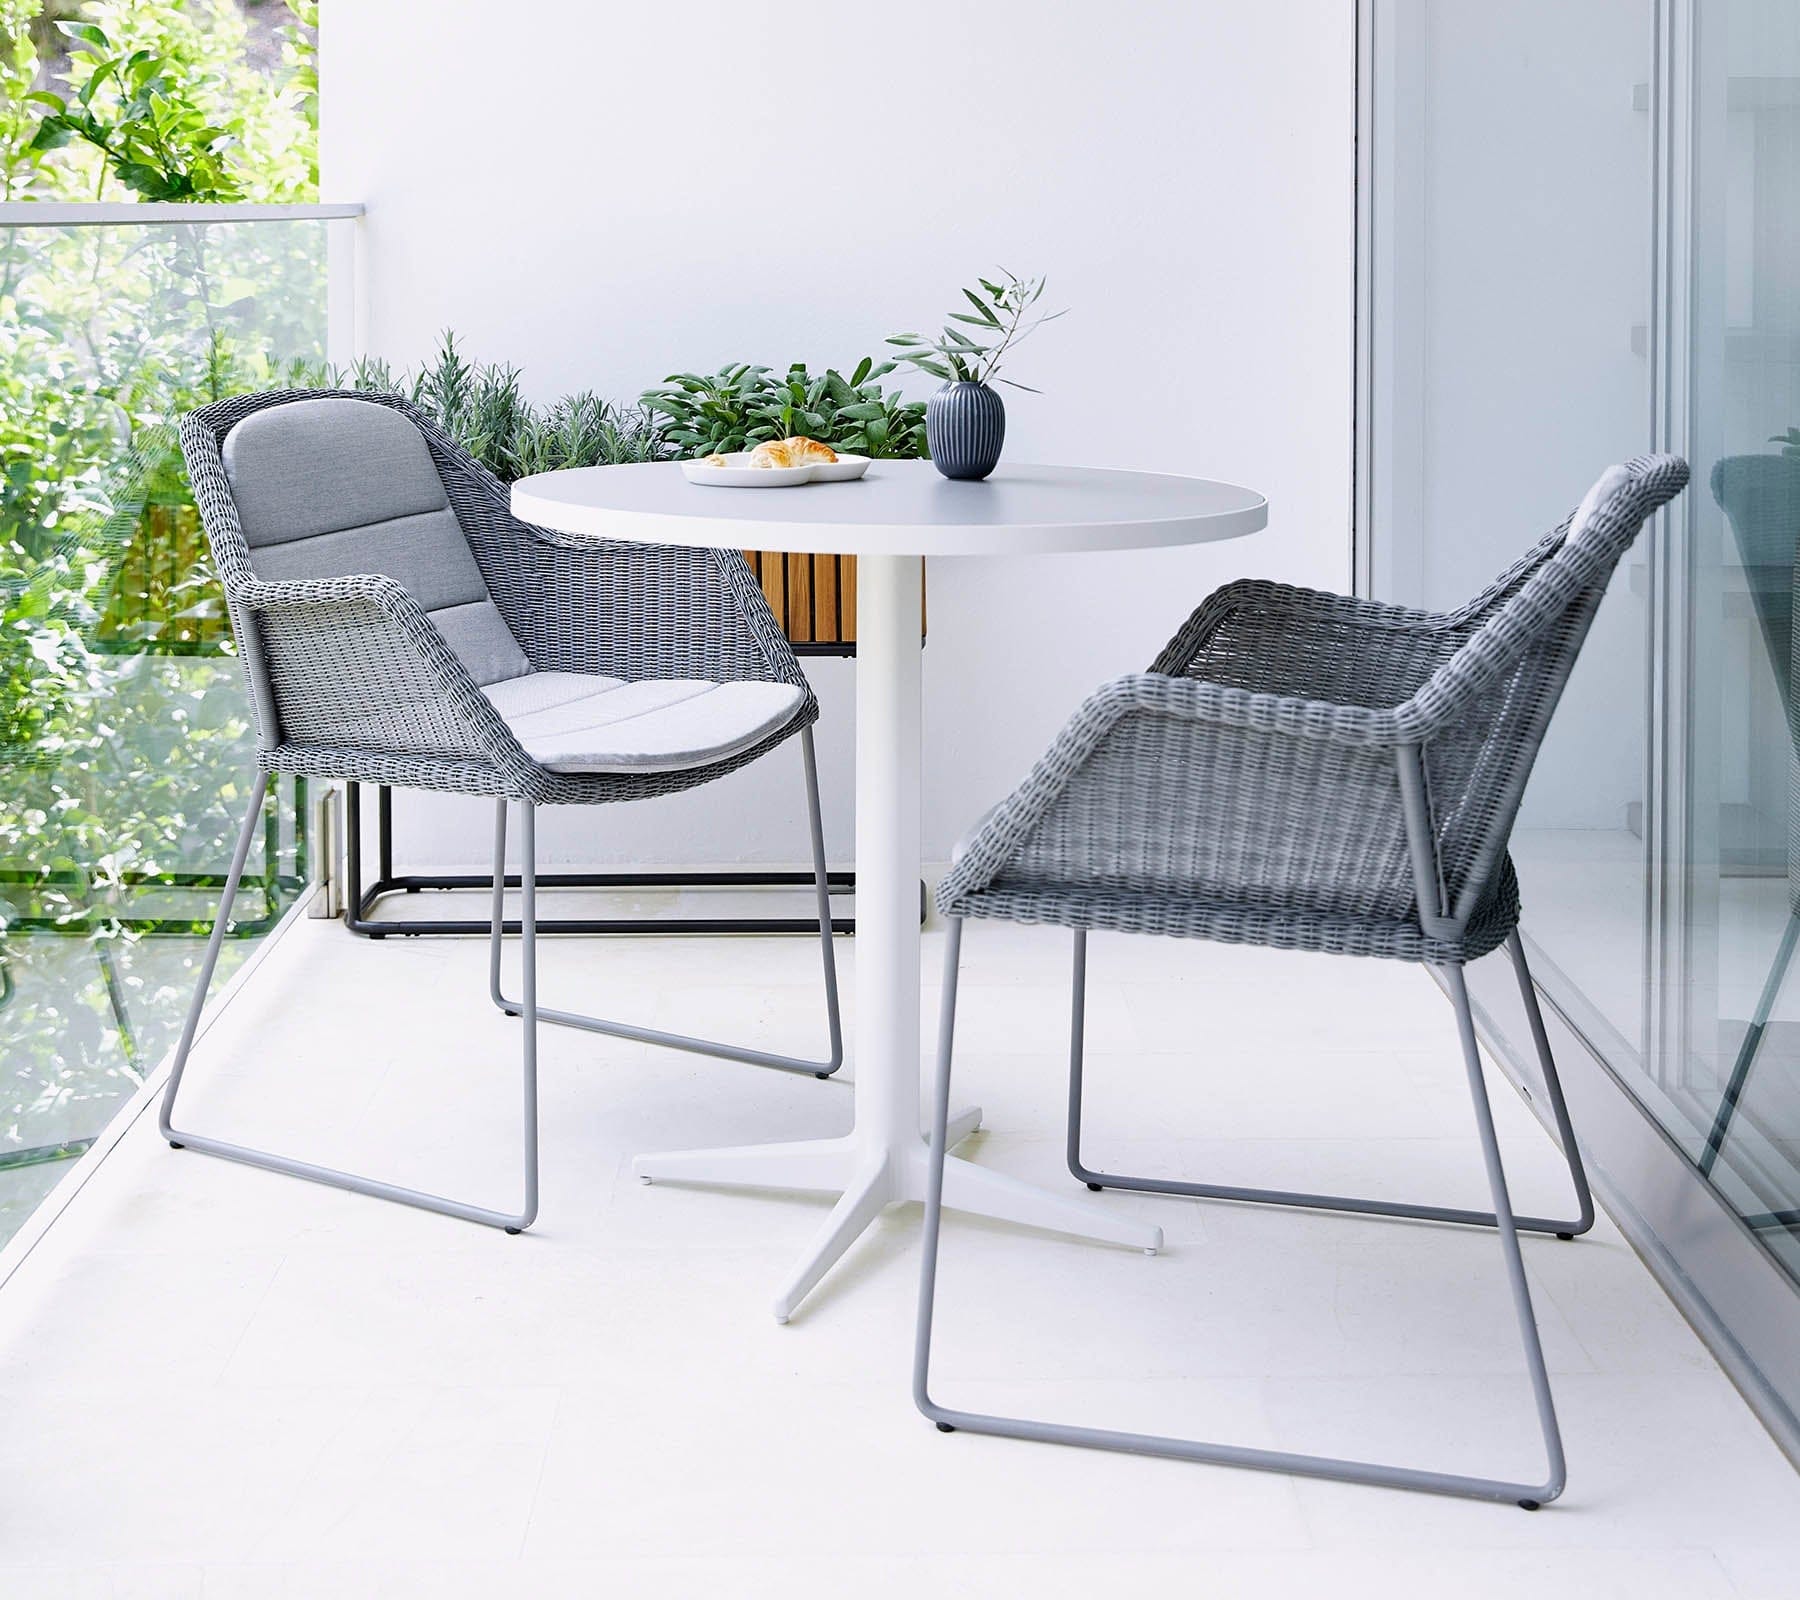 Boxhill's Breeze Dining Weave Chair Light Grey lifestyle image with round table in the balcony